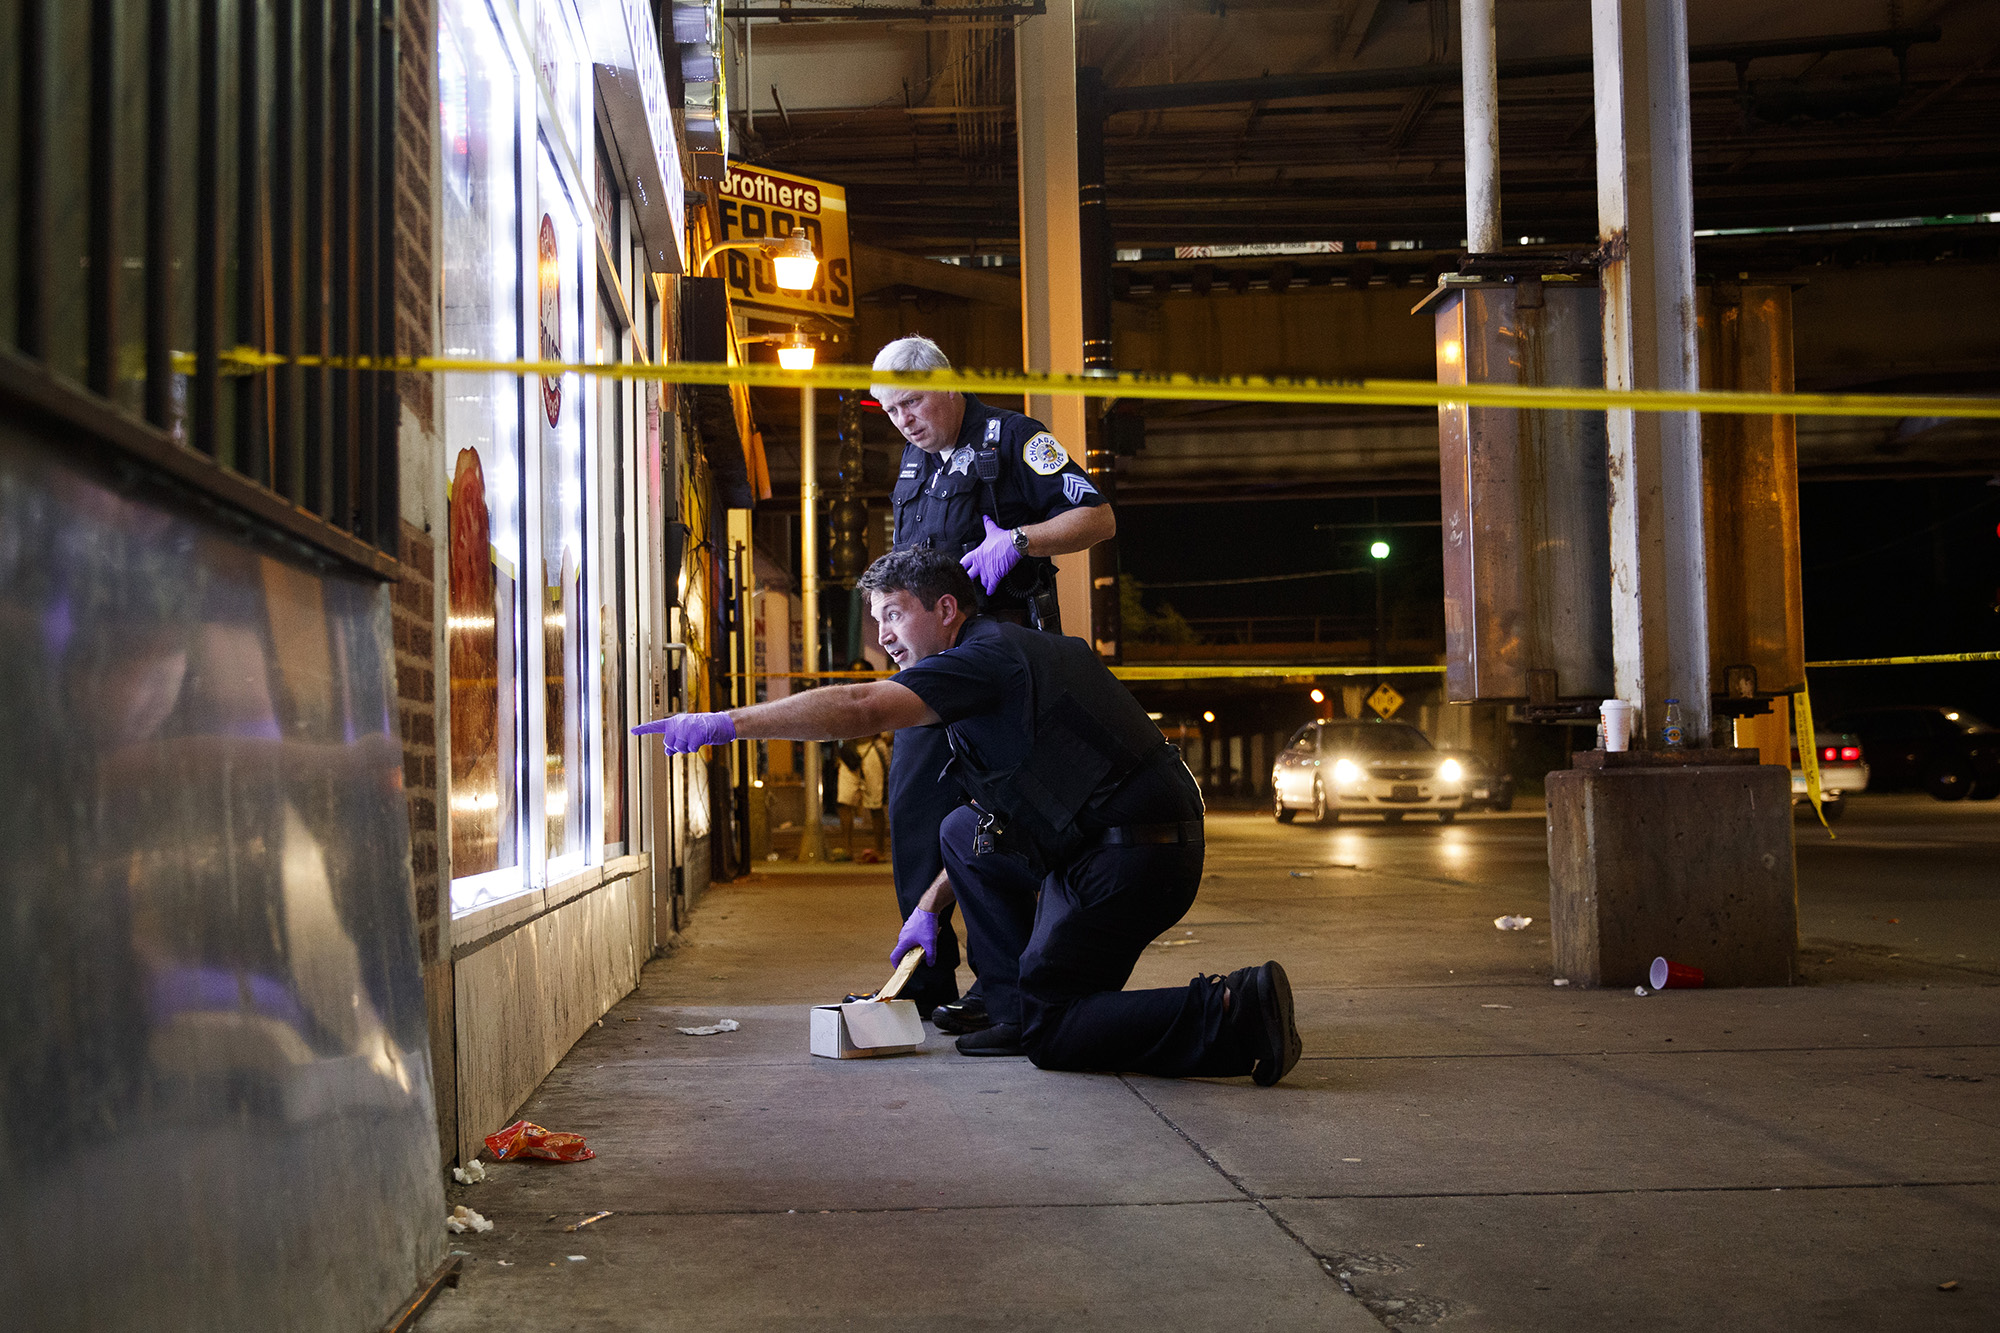 Chicago gun violence cools off in 2nd night of Fourth of July weekend, with 7 shot